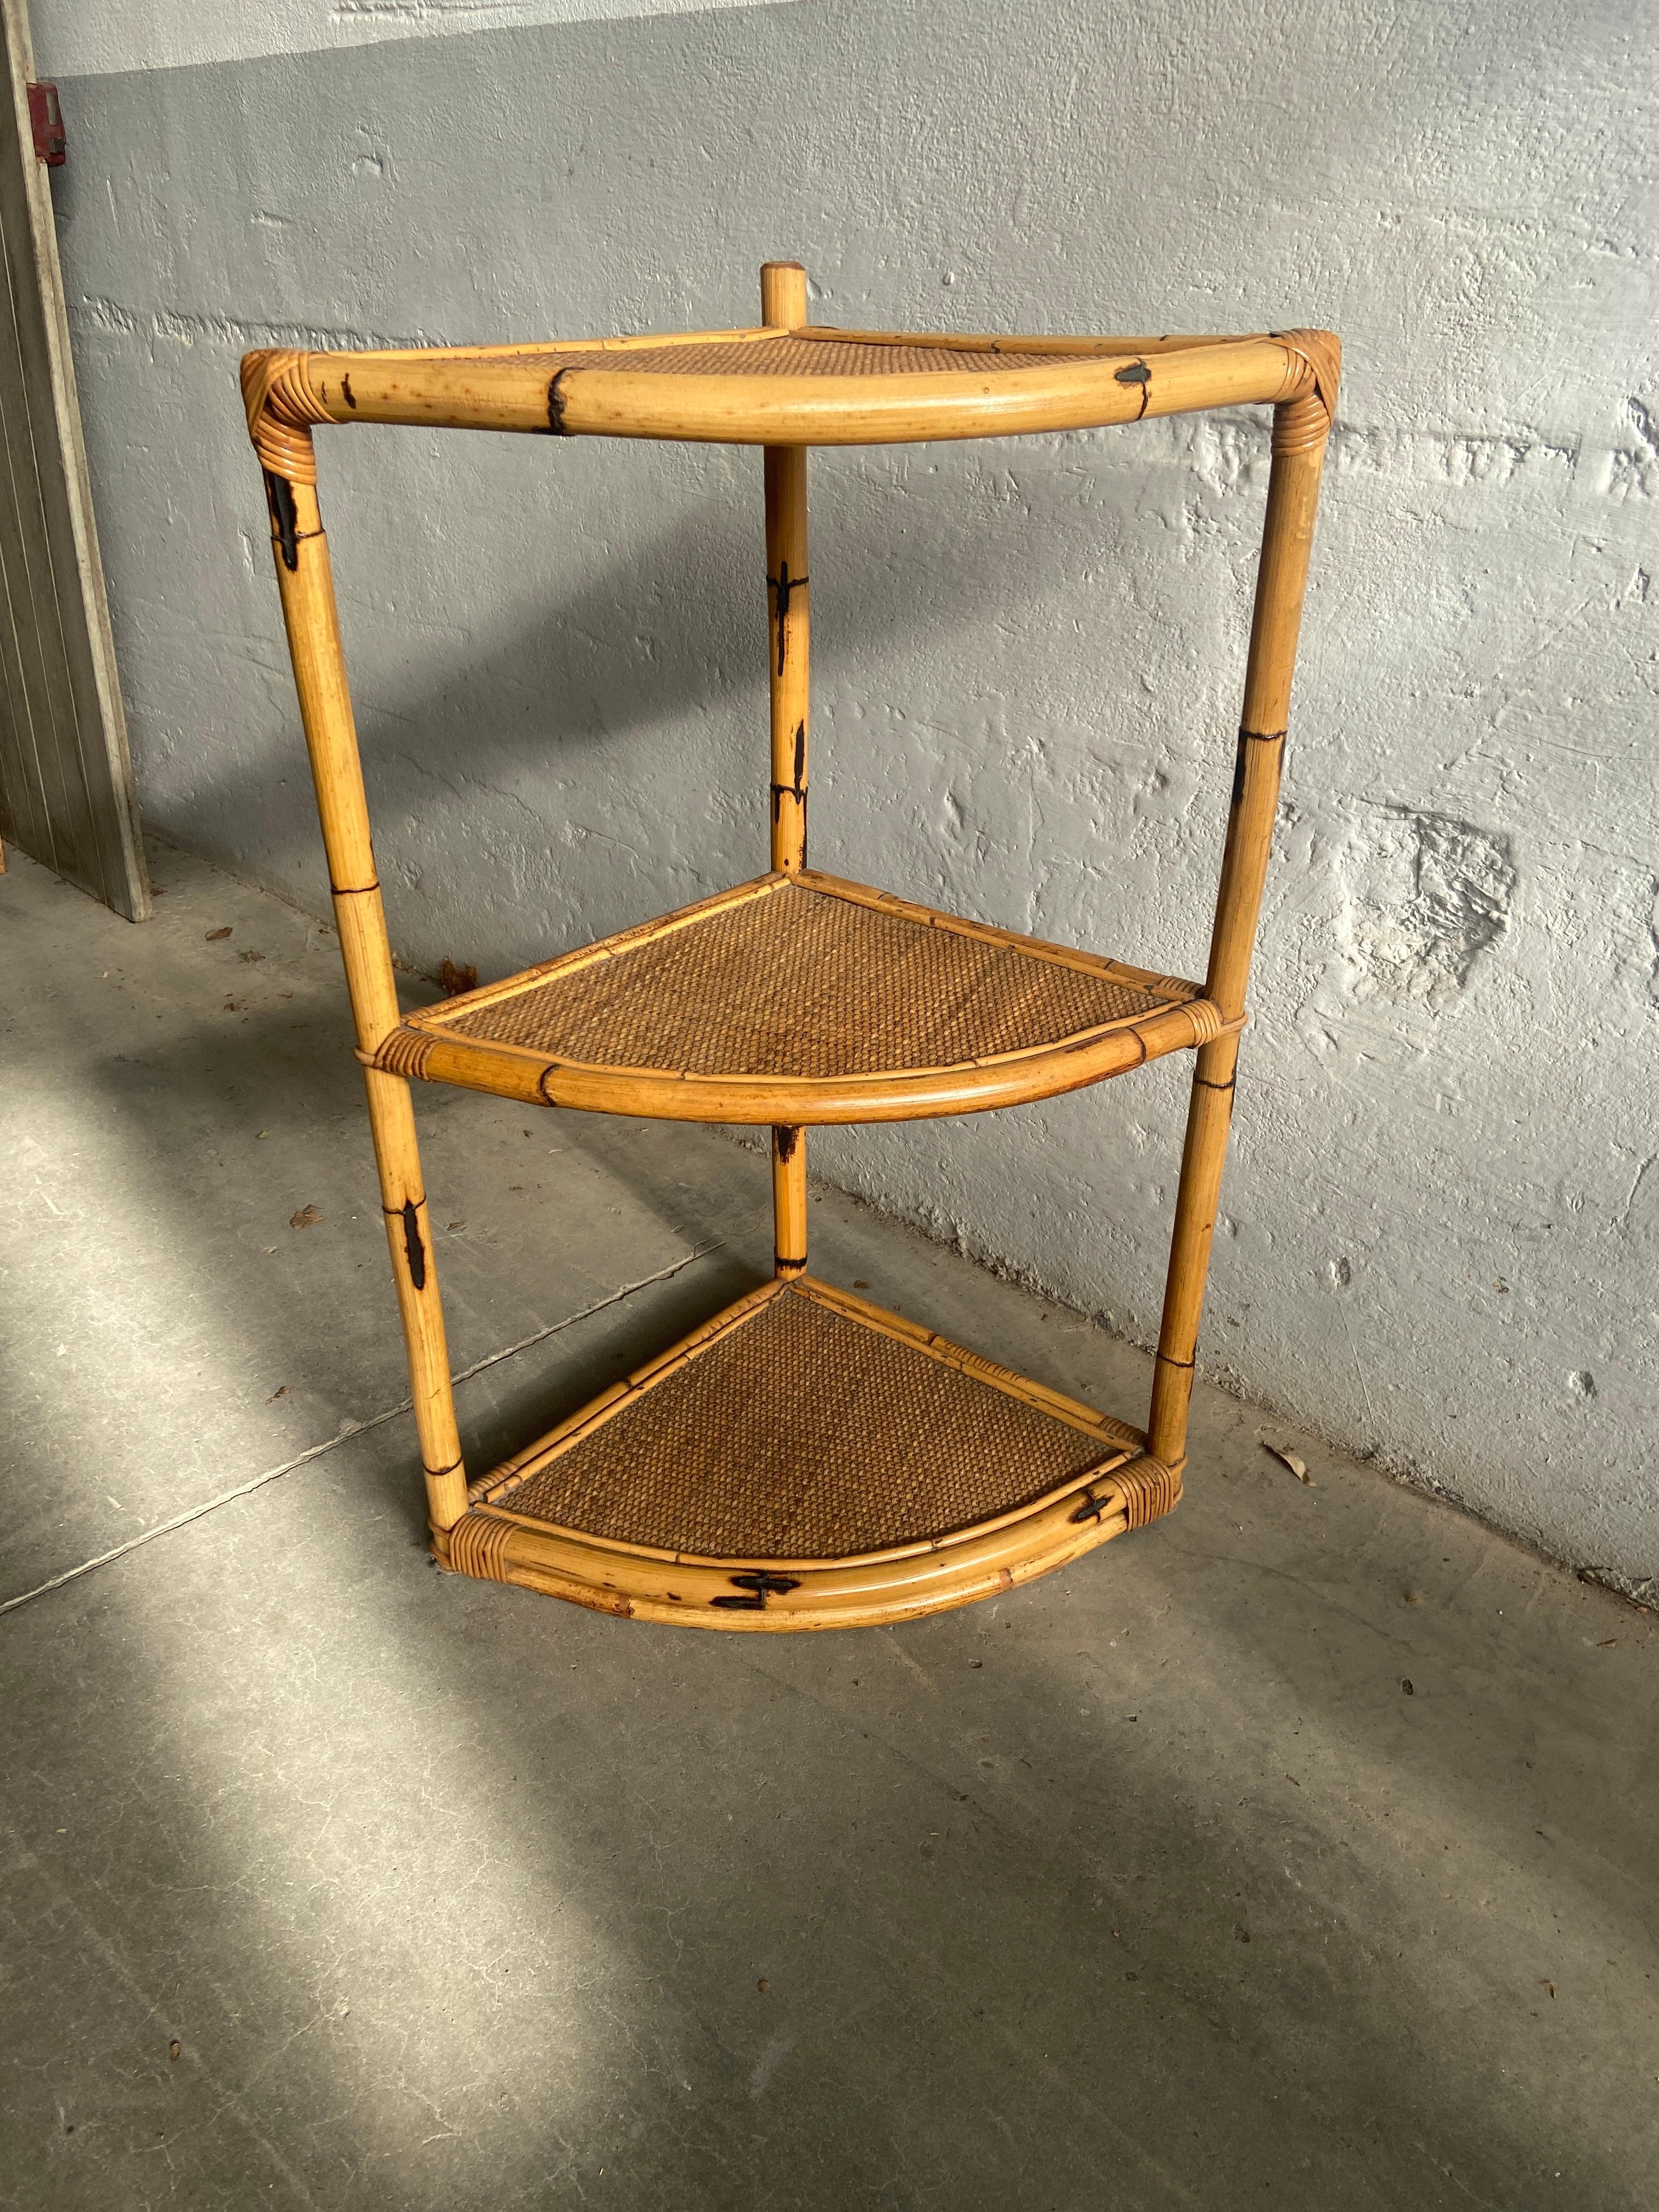 Late 20th Century Mid-Century Modern Italian Freestanding Corner Etagere in Bamboo and Rattan For Sale